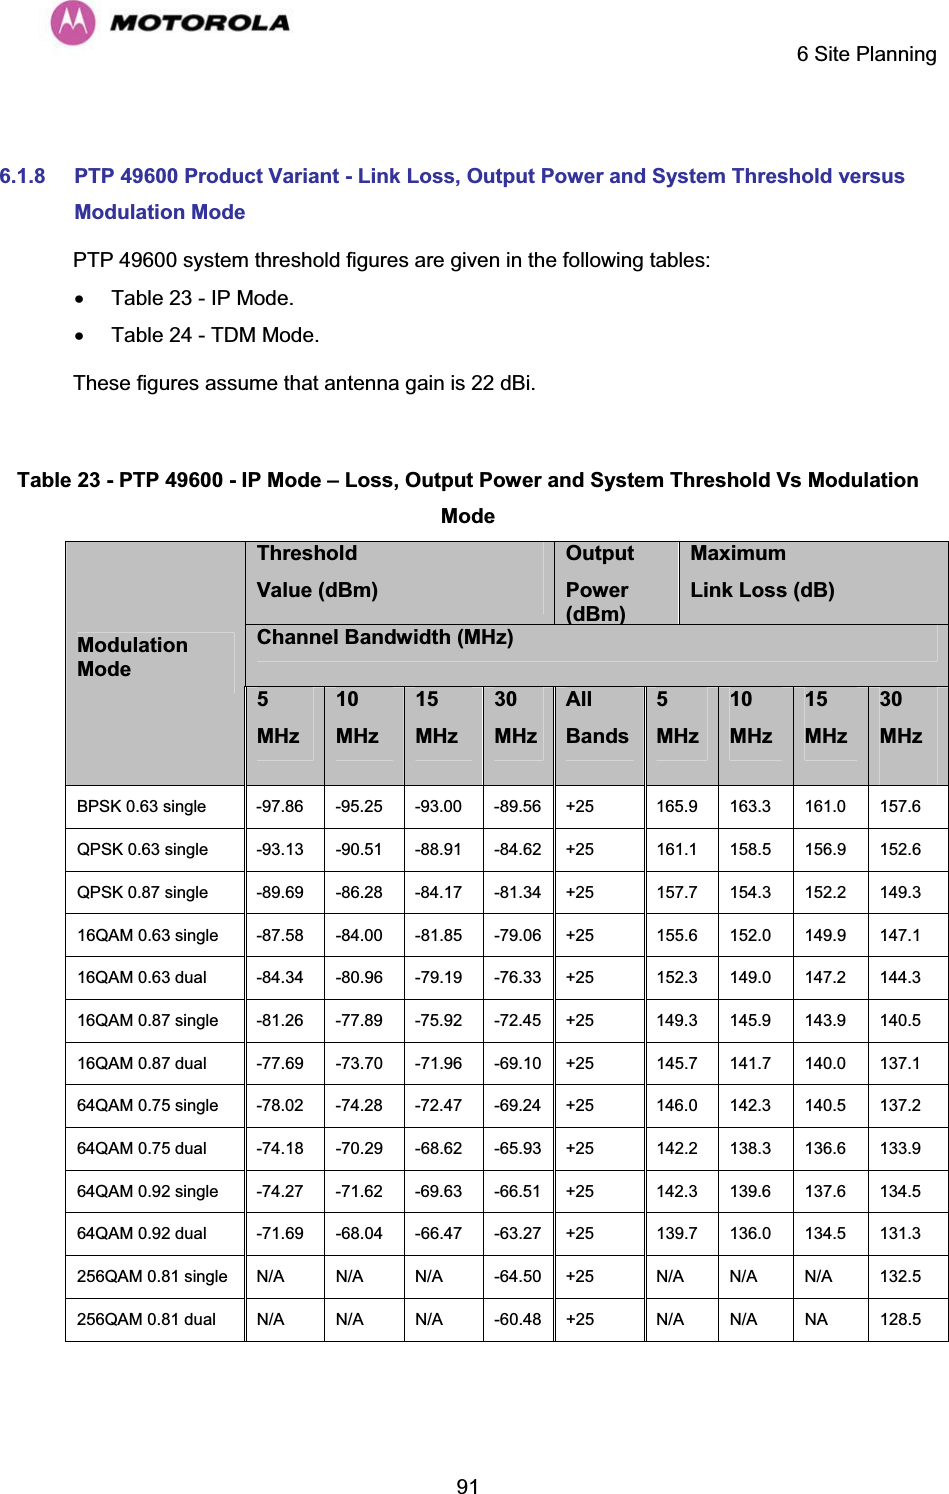     6 Site Planning  91 6.1.8 PTP 49600 Product Variant - Link Loss, Output Power and System Threshold versus Modulation Mode PTP 49600 system threshold figures are given in the following tables: x  Table 23 - IP Mode. x  Table 24 - TDM Mode. These figures assume that antenna gain is 22 dBi.  Table 23 - PTP 49600 - IP Mode – Loss, Output Power and System Threshold Vs Modulation ModeThreshold Value (dBm) Output Power (dBm)MaximumLink Loss (dB) Channel Bandwidth (MHz) ModulationMode5MHz10MHz15MHz30MHzAllBands 5MHz10MHz15MHz30MHzBPSK 0.63 single  -97.86   -95.25   -93.00   -89.56  +25  165.9   163.3   161.0   157.6  QPSK 0.63 single  -93.13   -90.51   -88.91   -84.62  +25  161.1   158.5   156.9   152.6  QPSK 0.87 single  -89.69   -86.28   -84.17   -81.34  +25  157.7   154.3   152.2   149.3  16QAM 0.63 single  -87.58   -84.00   -81.85   -79.06  +25  155.6   152.0   149.9   147.1  16QAM 0.63 dual  -84.34   -80.96   -79.19   -76.33  +25  152.3   149.0   147.2   144.3  16QAM 0.87 single  -81.26   -77.89   -75.92   -72.45  +25  149.3   145.9   143.9   140.5  16QAM 0.87 dual  -77.69   -73.70   -71.96   -69.10  +25  145.7   141.7   140.0   137.1  64QAM 0.75 single  -78.02   -74.28   -72.47   -69.24  +25  146.0   142.3   140.5   137.2  64QAM 0.75 dual  -74.18   -70.29   -68.62   -65.93  +25  142.2   138.3   136.6   133.9  64QAM 0.92 single  -74.27   -71.62   -69.63   -66.51  +25  142.3   139.6   137.6   134.5  64QAM 0.92 dual  -71.69   -68.04   -66.47   -63.27  +25  139.7   136.0   134.5   131.3  256QAM 0.81 single  N/A   N/A   N/A   -64.50  +25  N/A   N/A   N/A   132.5  256QAM 0.81 dual  N/A   N/A   N/A   -60.48  +25  N/A   N/A   NA   128.5   